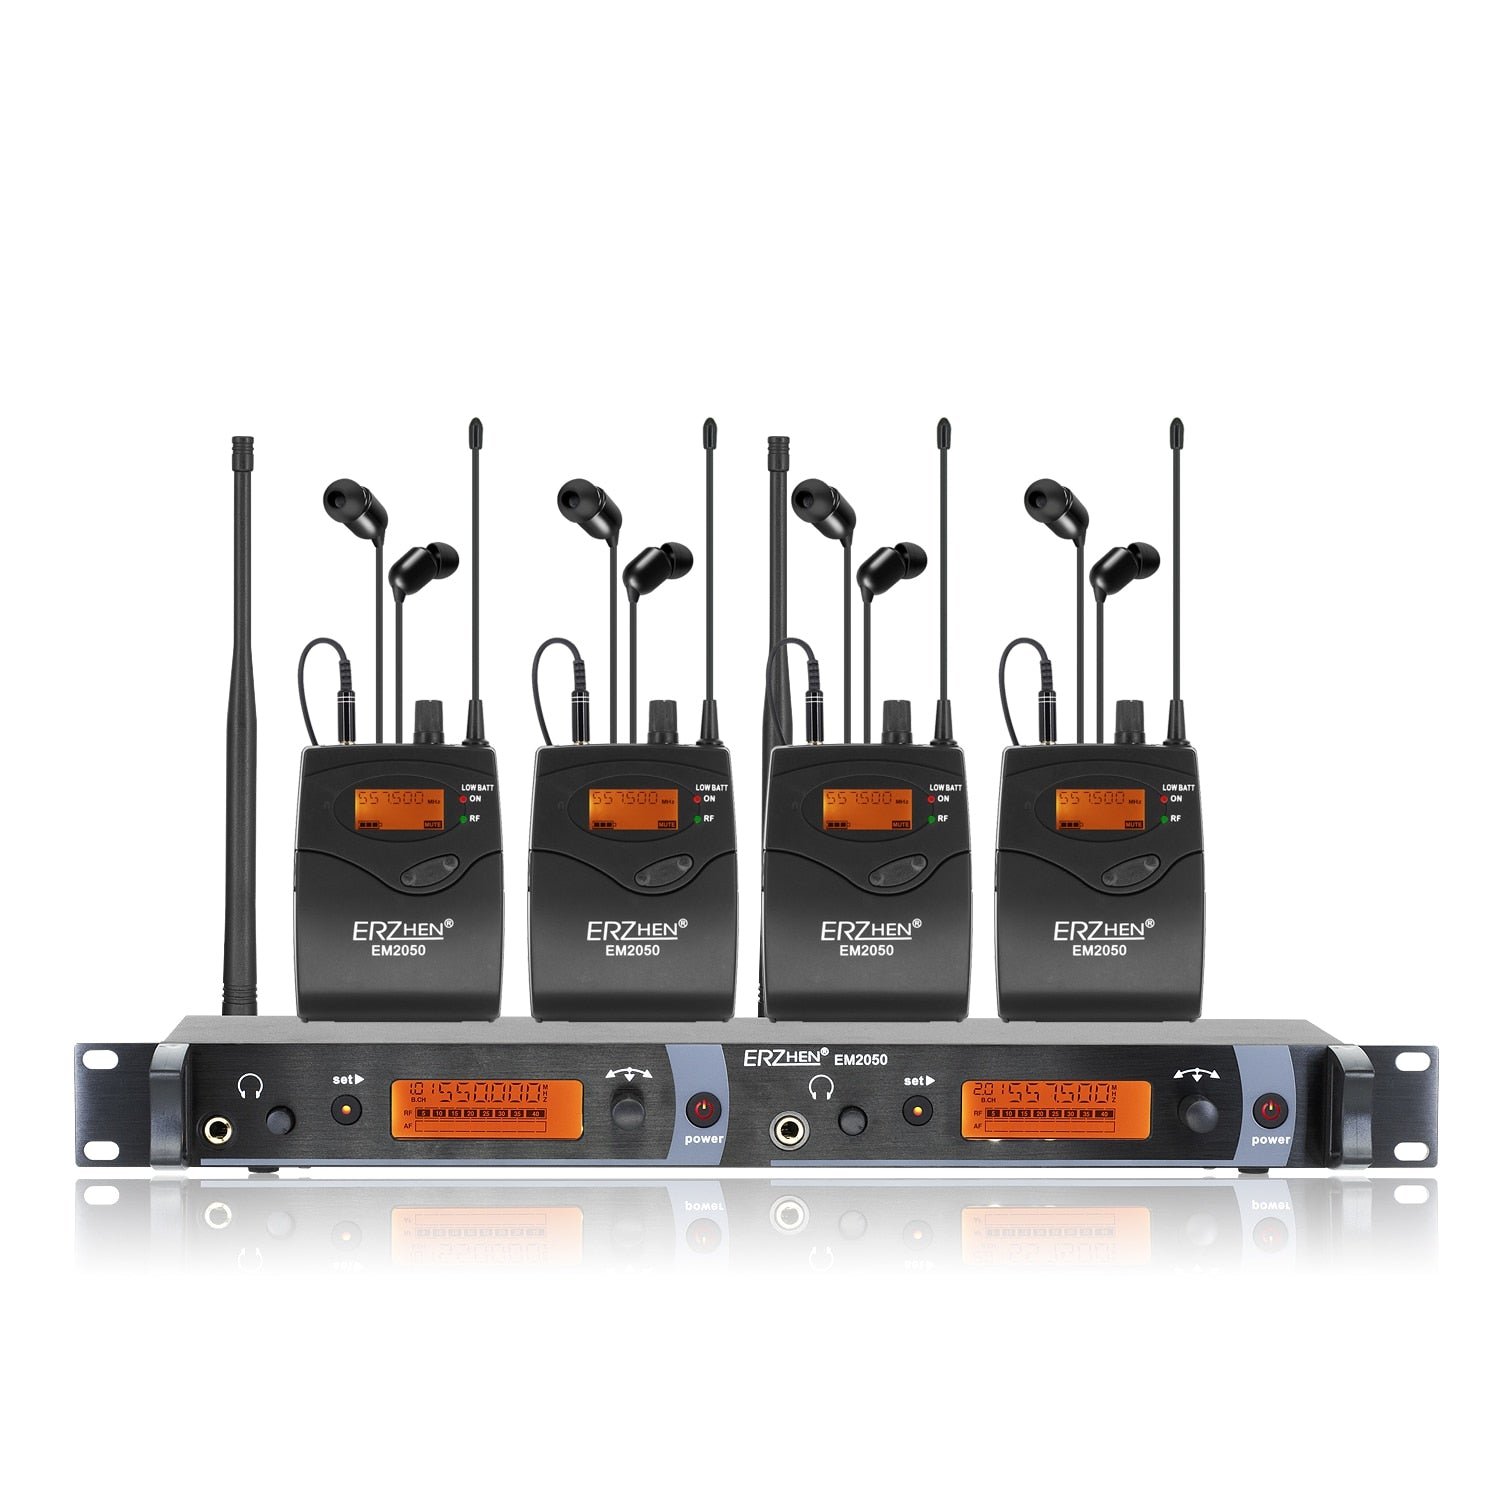 ERZHEN Wireless Monitor System in Ear Multi Transmitter Professional for Stage Performances EM2050